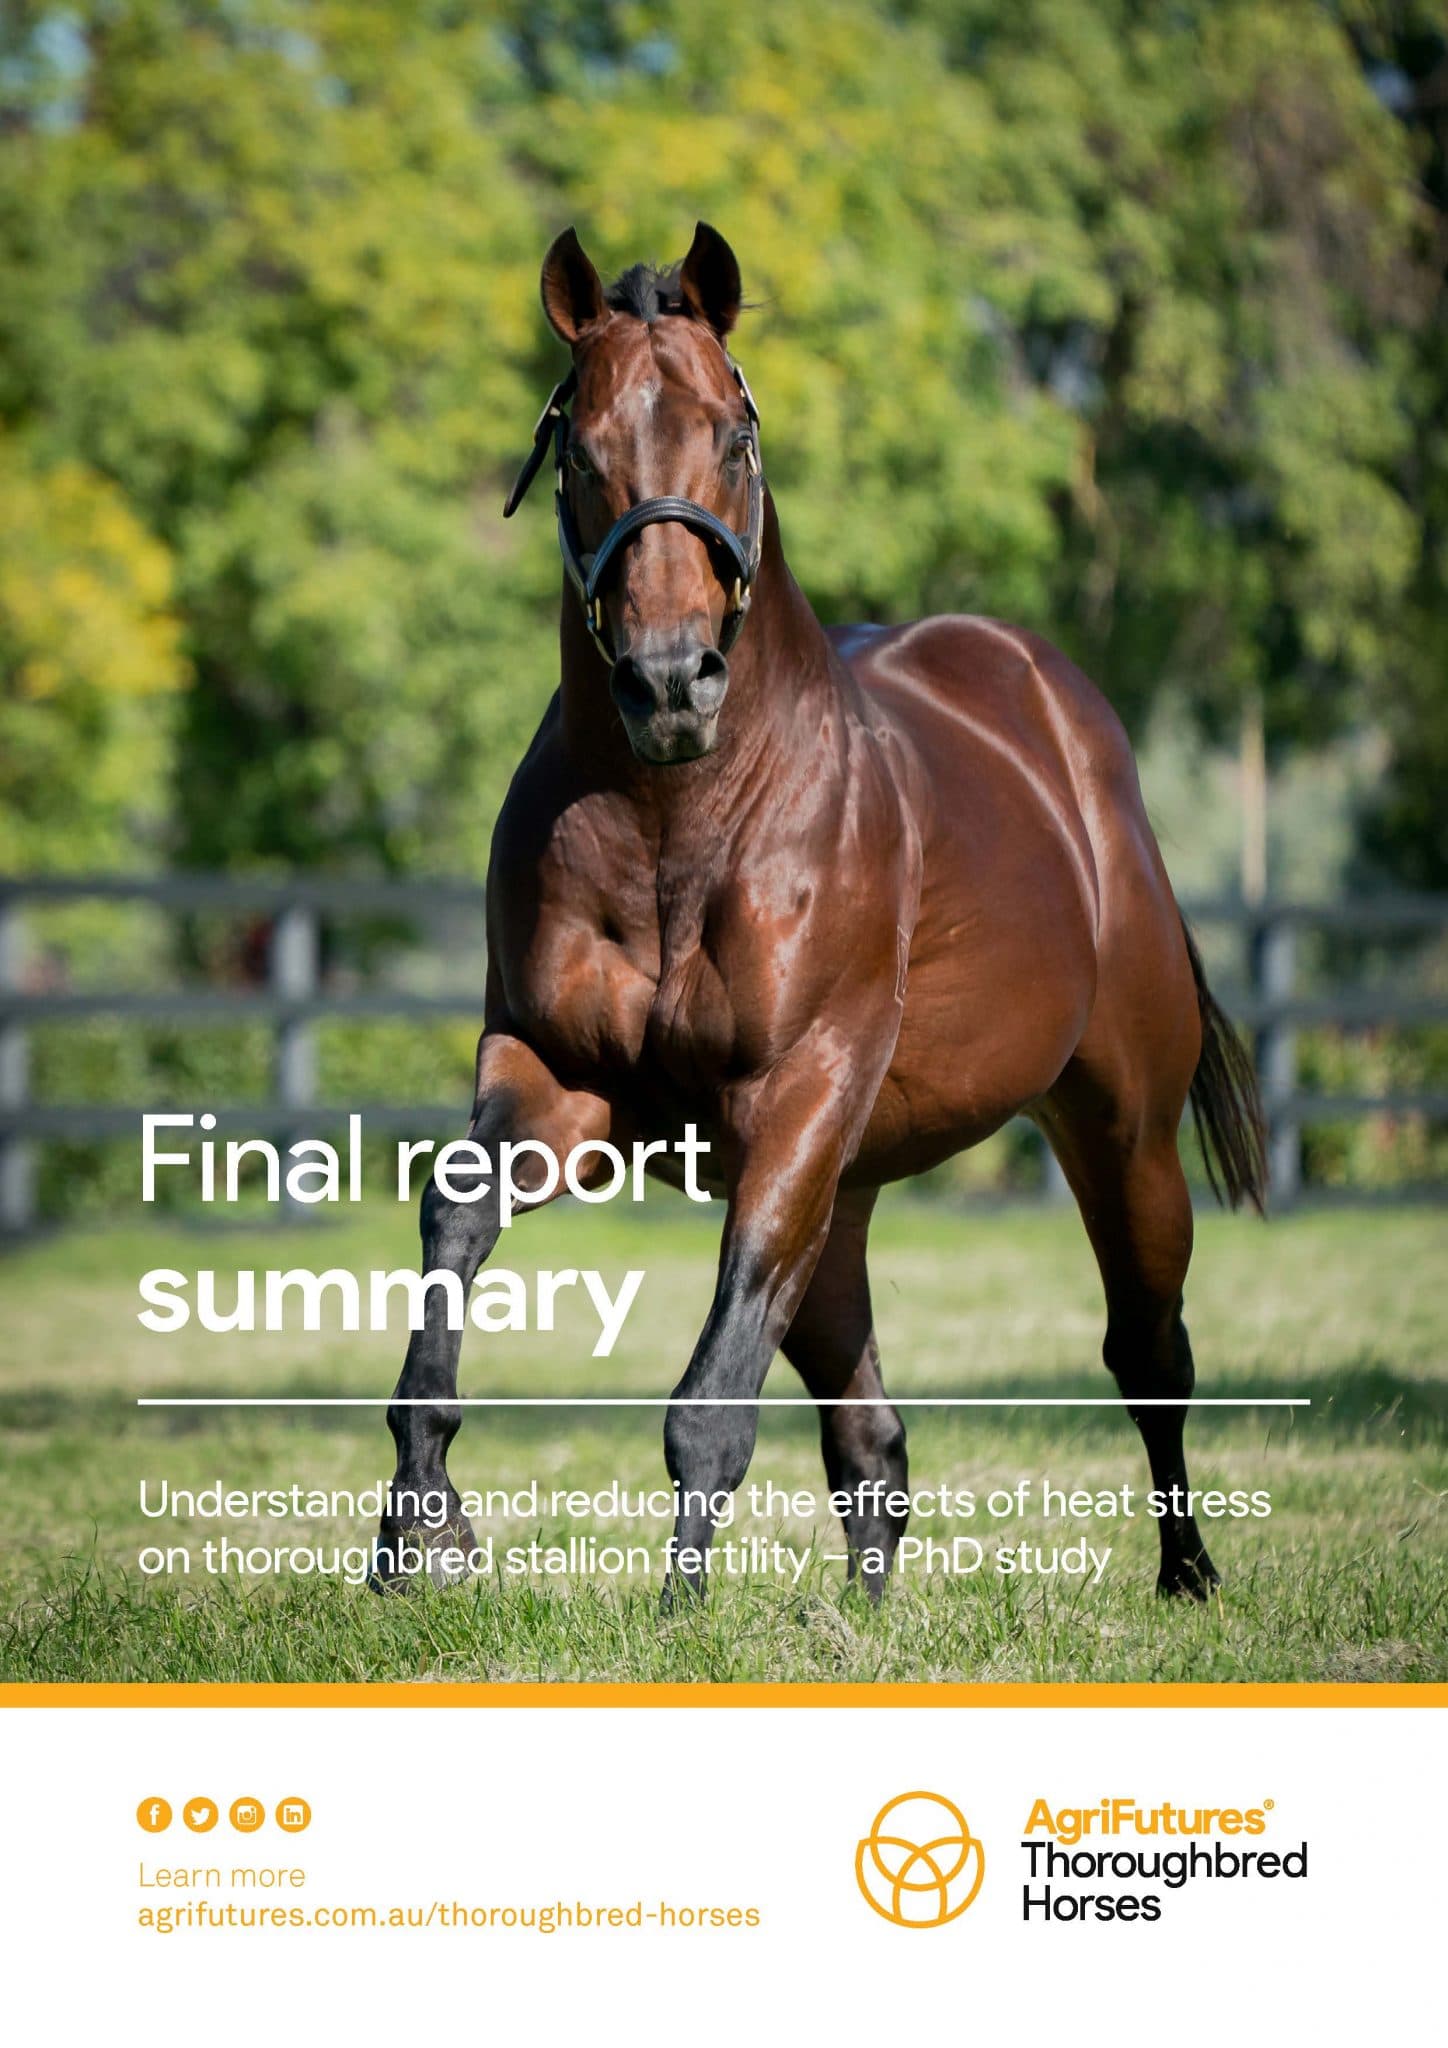 Final report summary: Understanding and reducing the effects of heat stress on thoroughbred stallion fertility - image